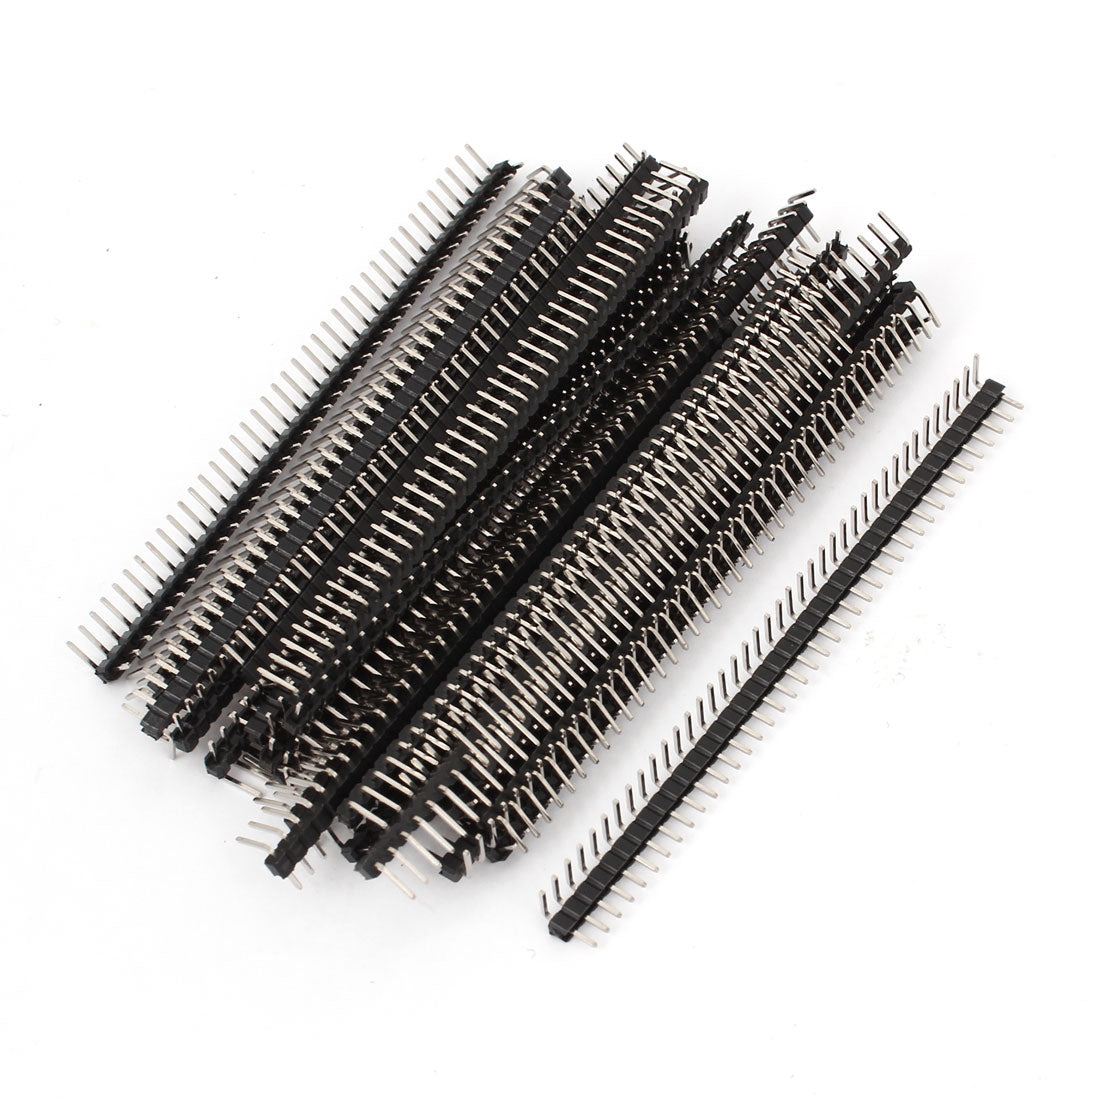 uxcell Uxcell 30pcs 40 Way Single Row Right Angle Pin Male Header Strip 2mm Pitch